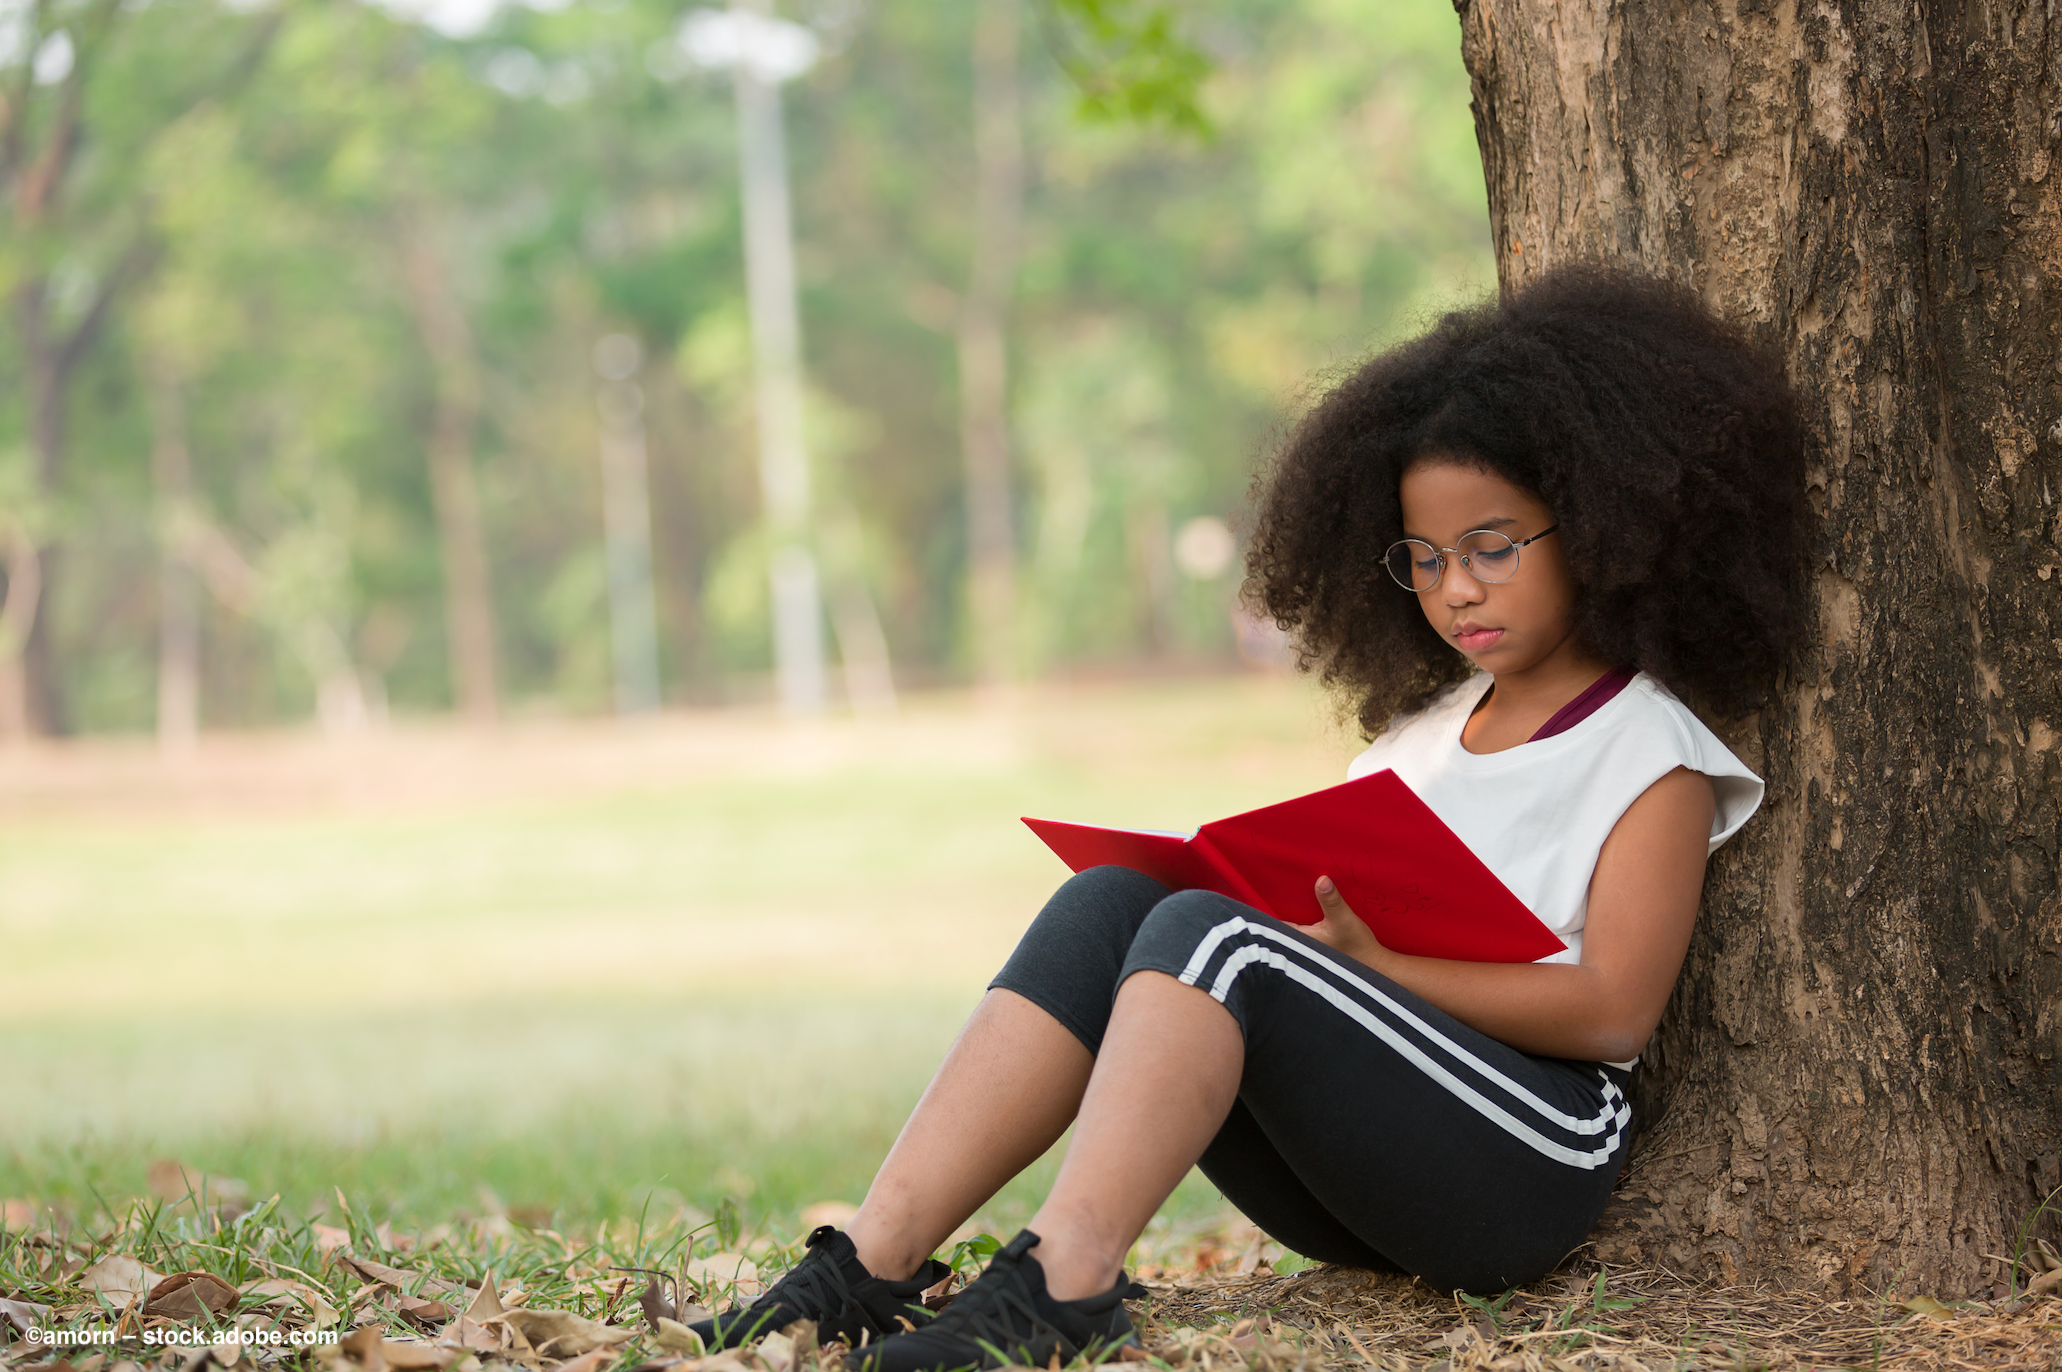 A young girl wearing glasses sits underneath a tree and reads a book. Image Credit: ©amorn – stock.adobe.com